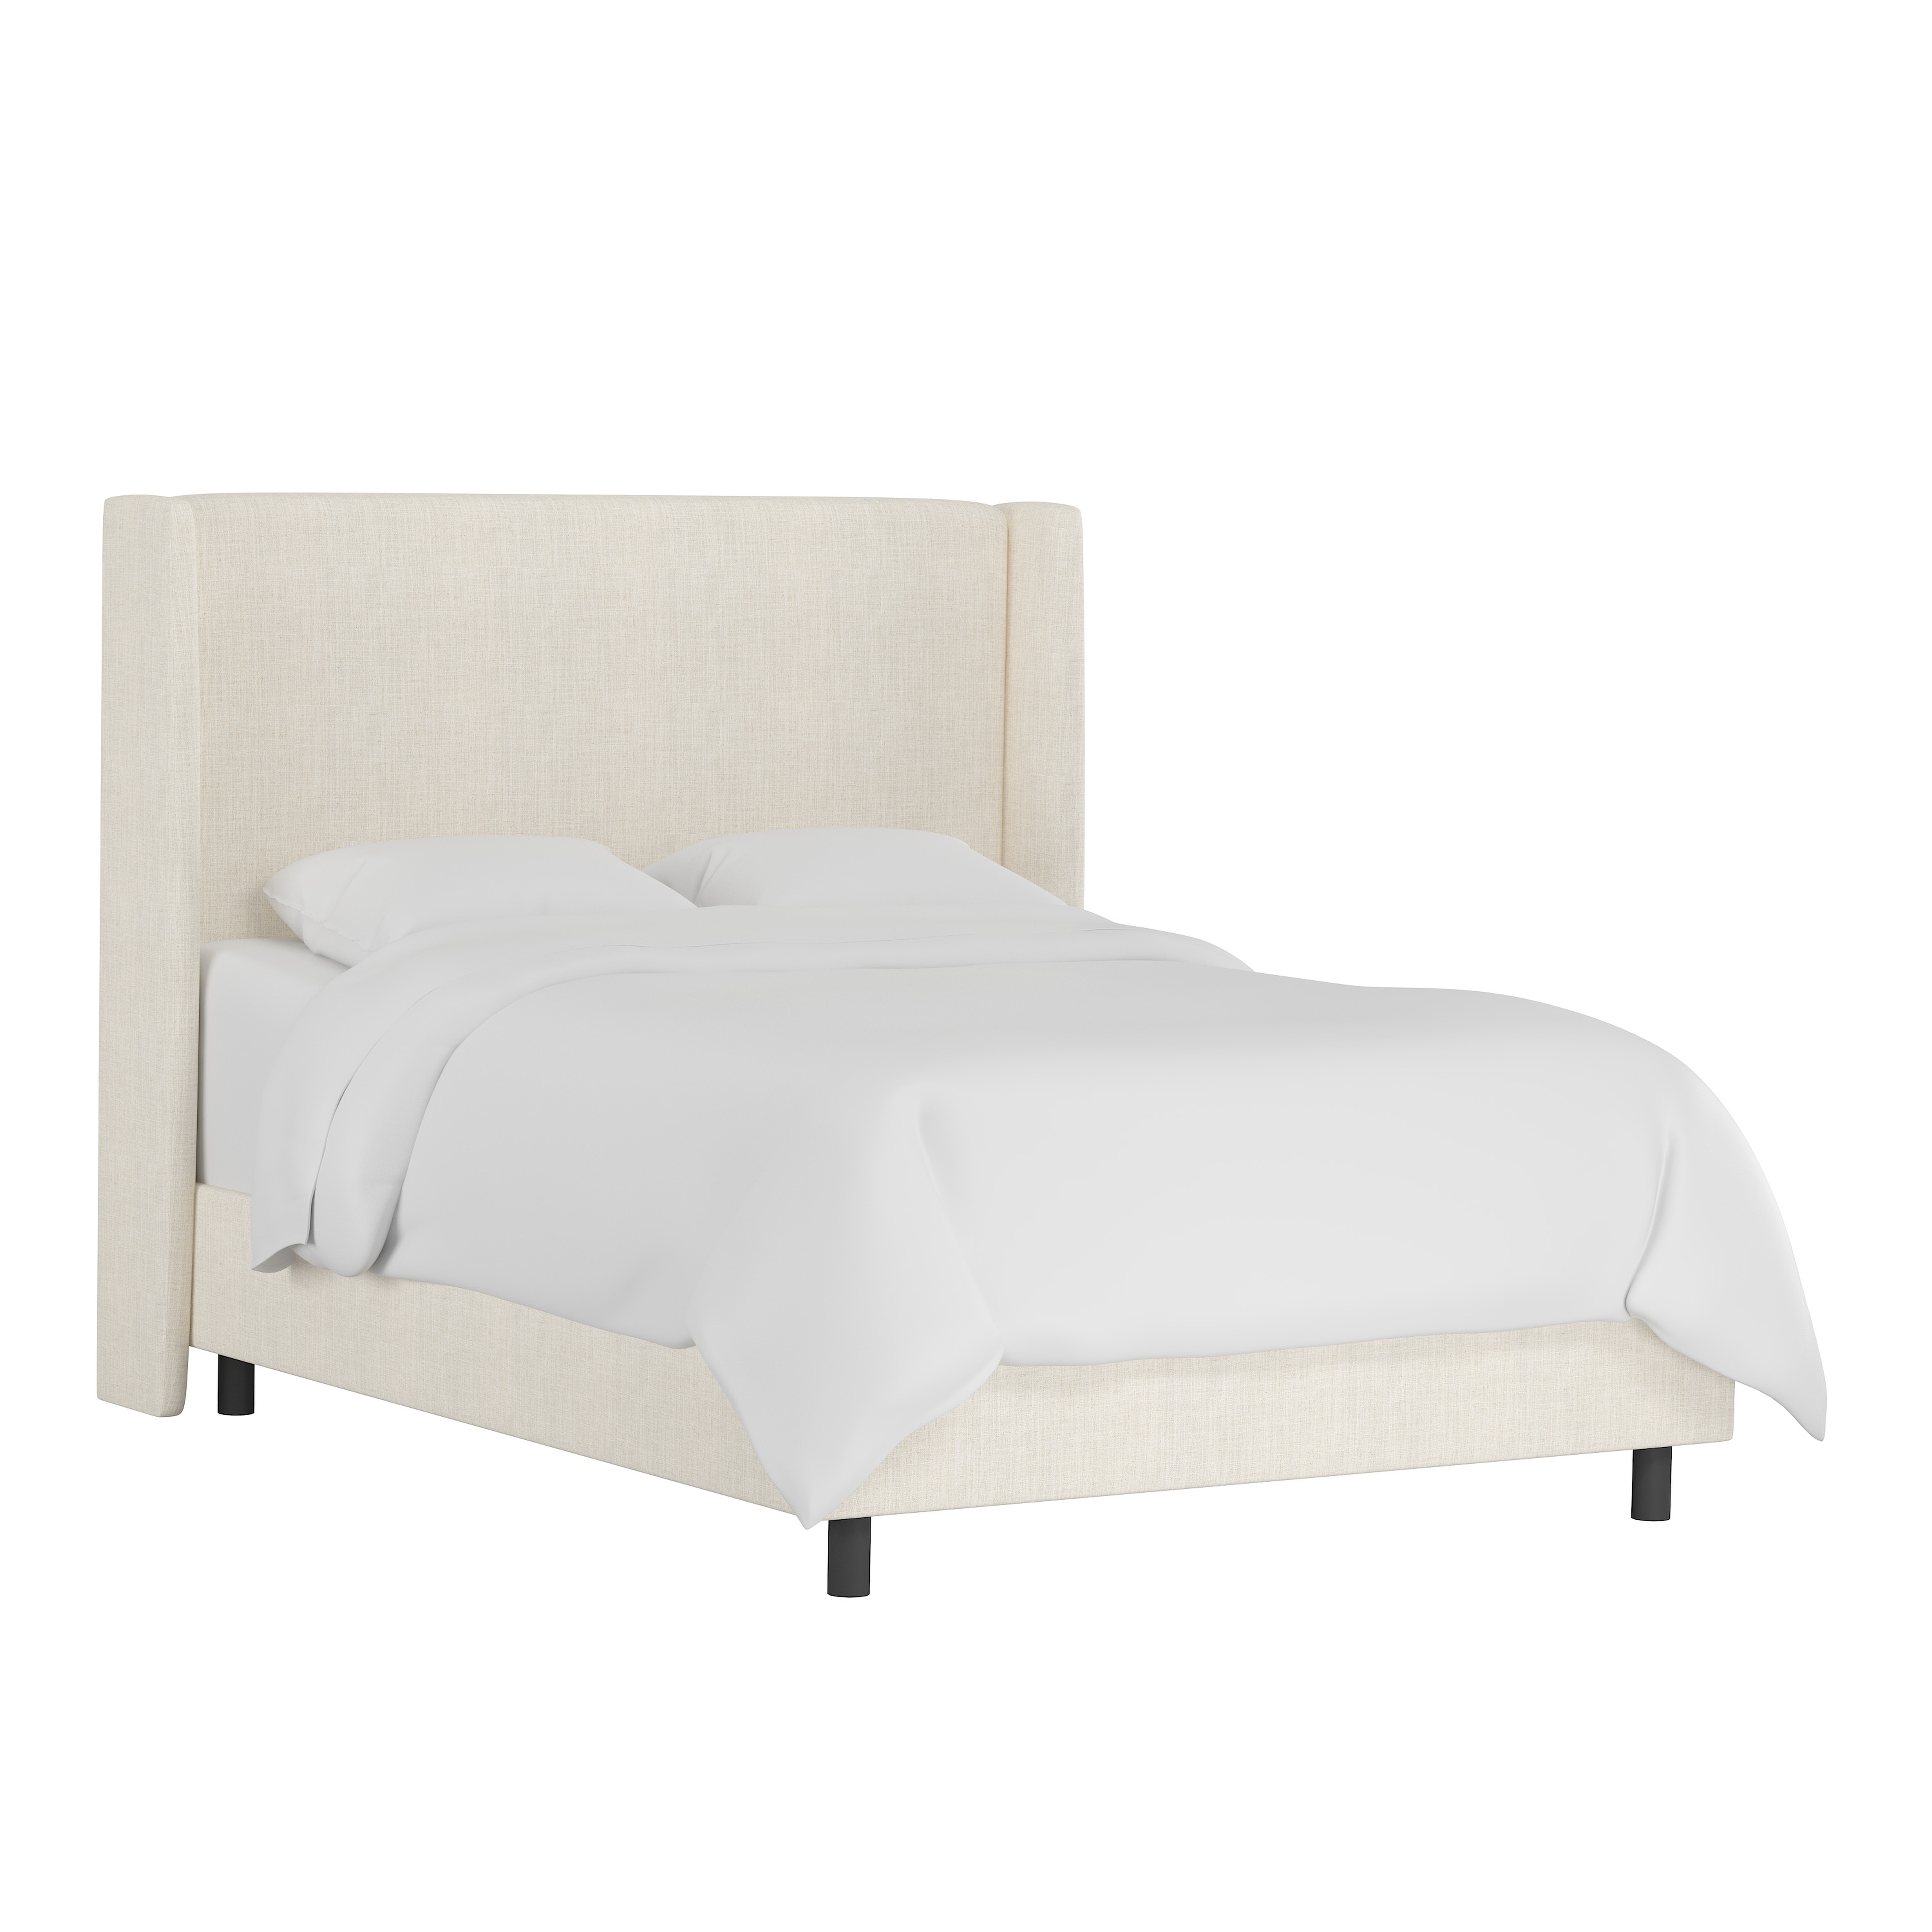 King Lawrence Wingback Bed - Third & Vine